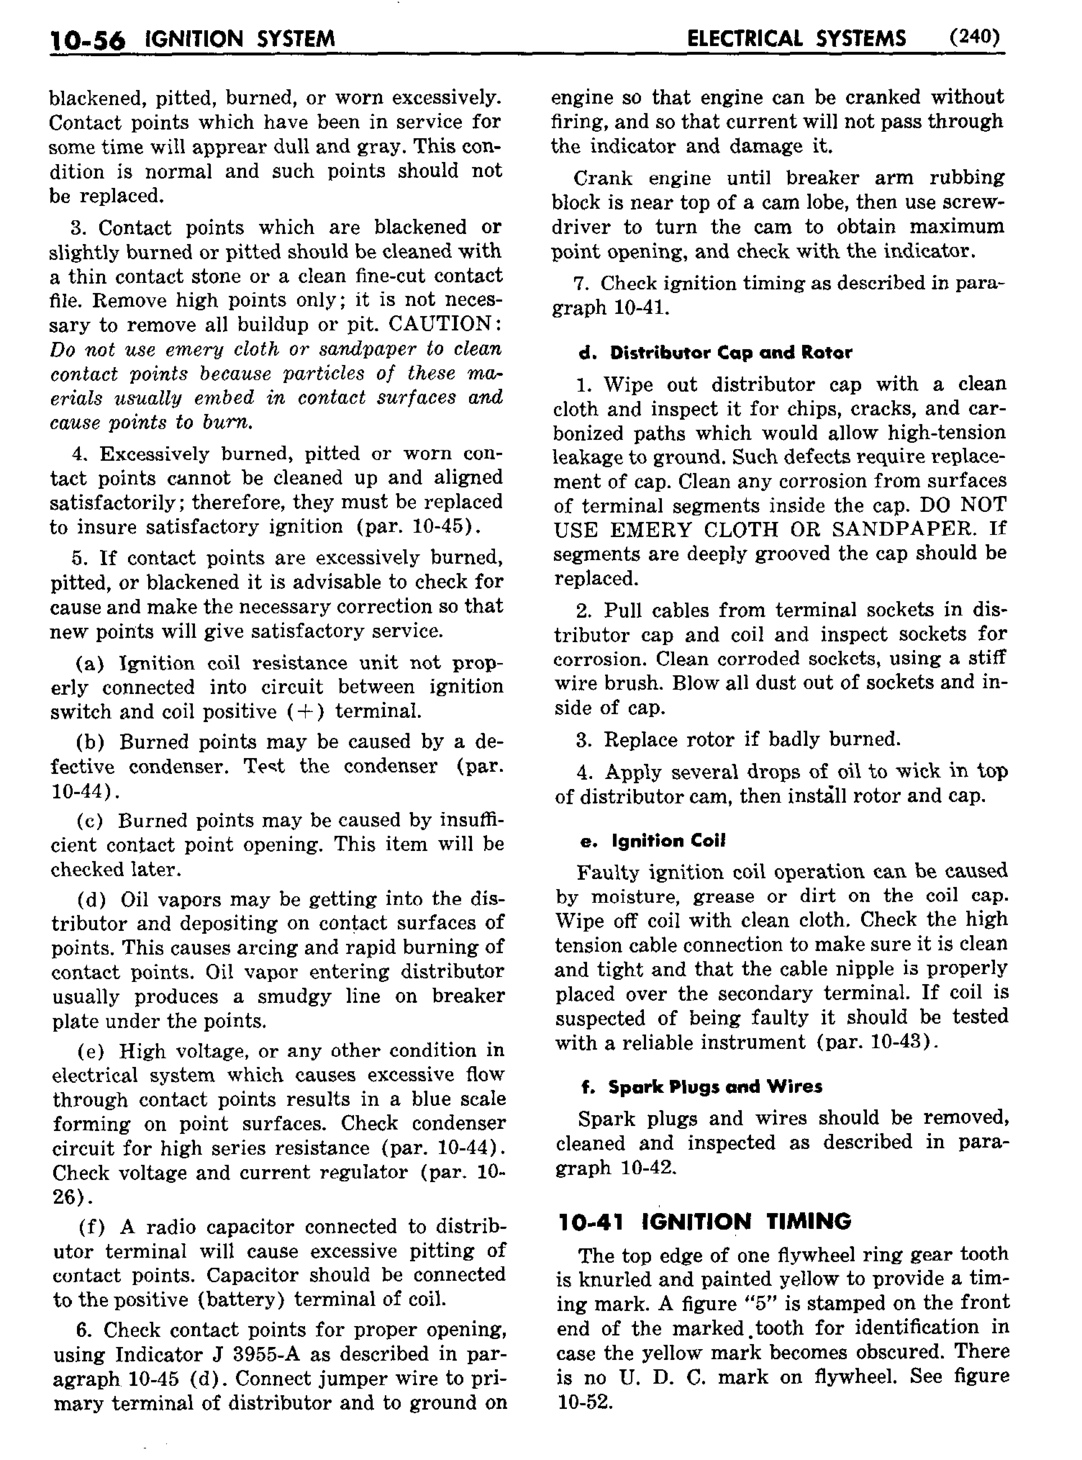 n_11 1953 Buick Shop Manual - Electrical Systems-056-056.jpg